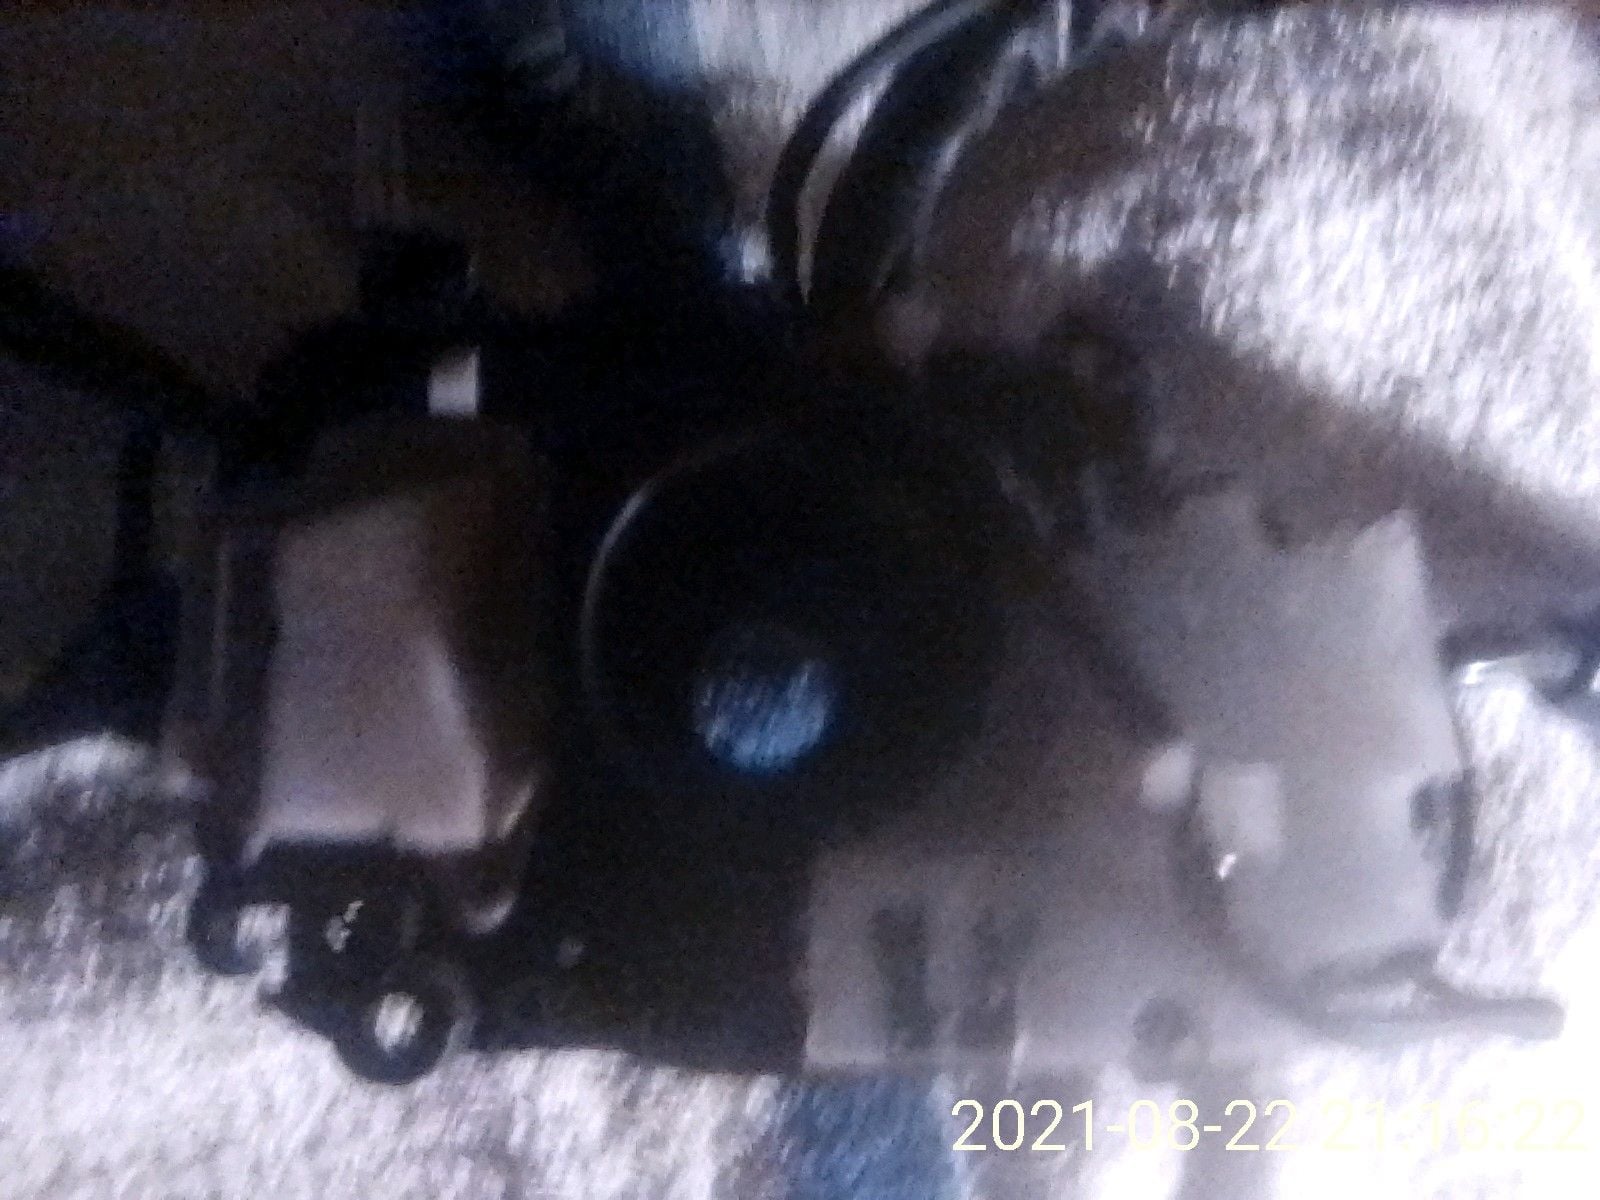 Miscellaneous - FD - OEM Steering Wheel Combination Switch - Used - 1993 to 1995 Mazda RX-7 - San Jose, CA 95121, United States